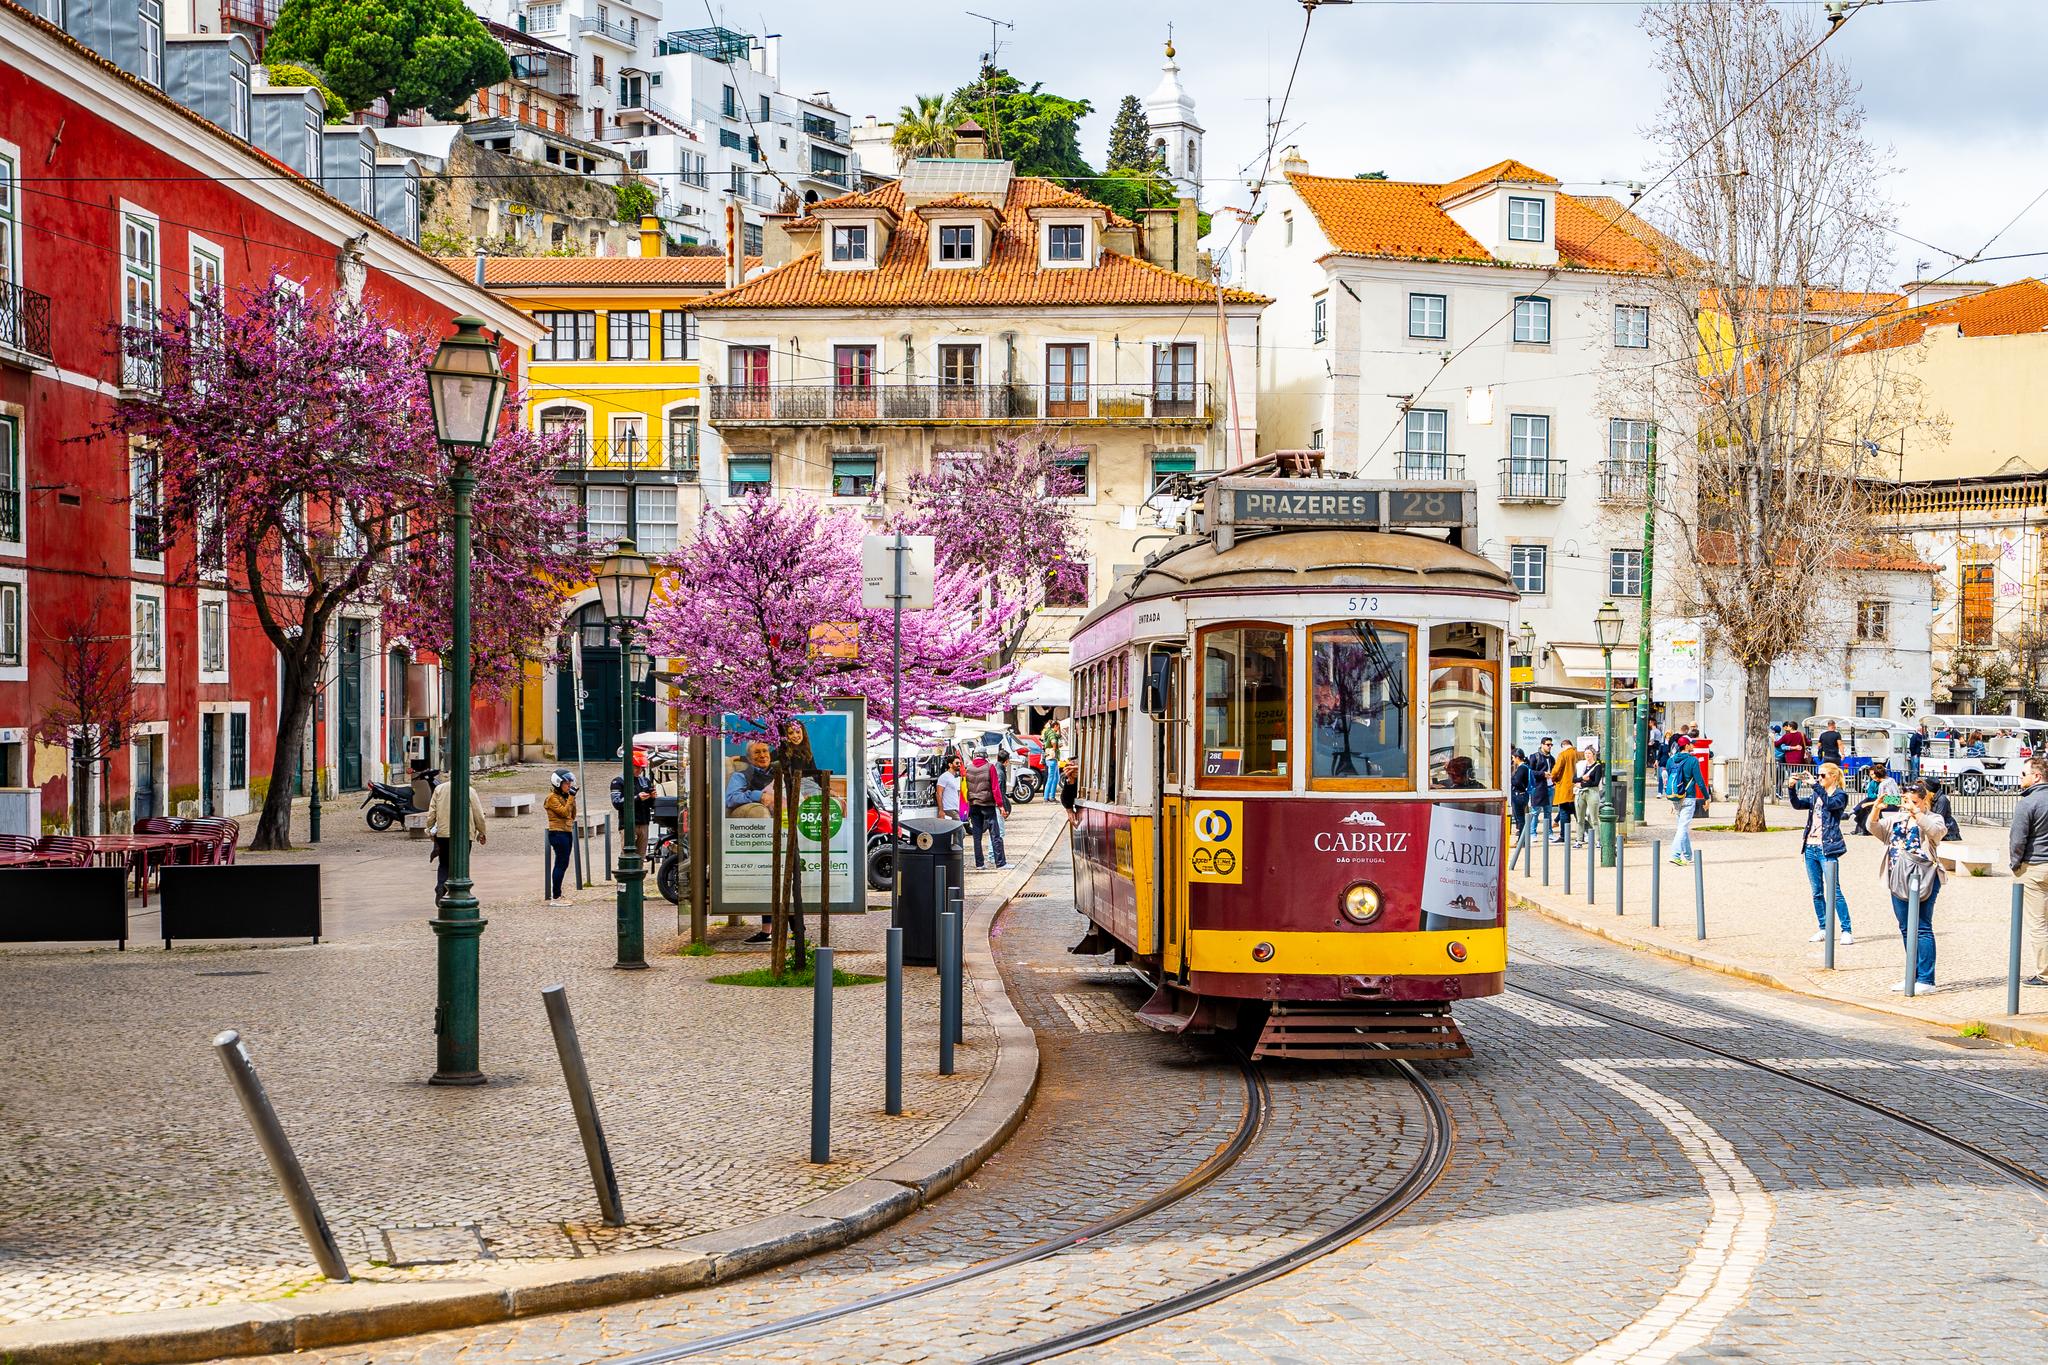 A photo of the Tram from Portugal